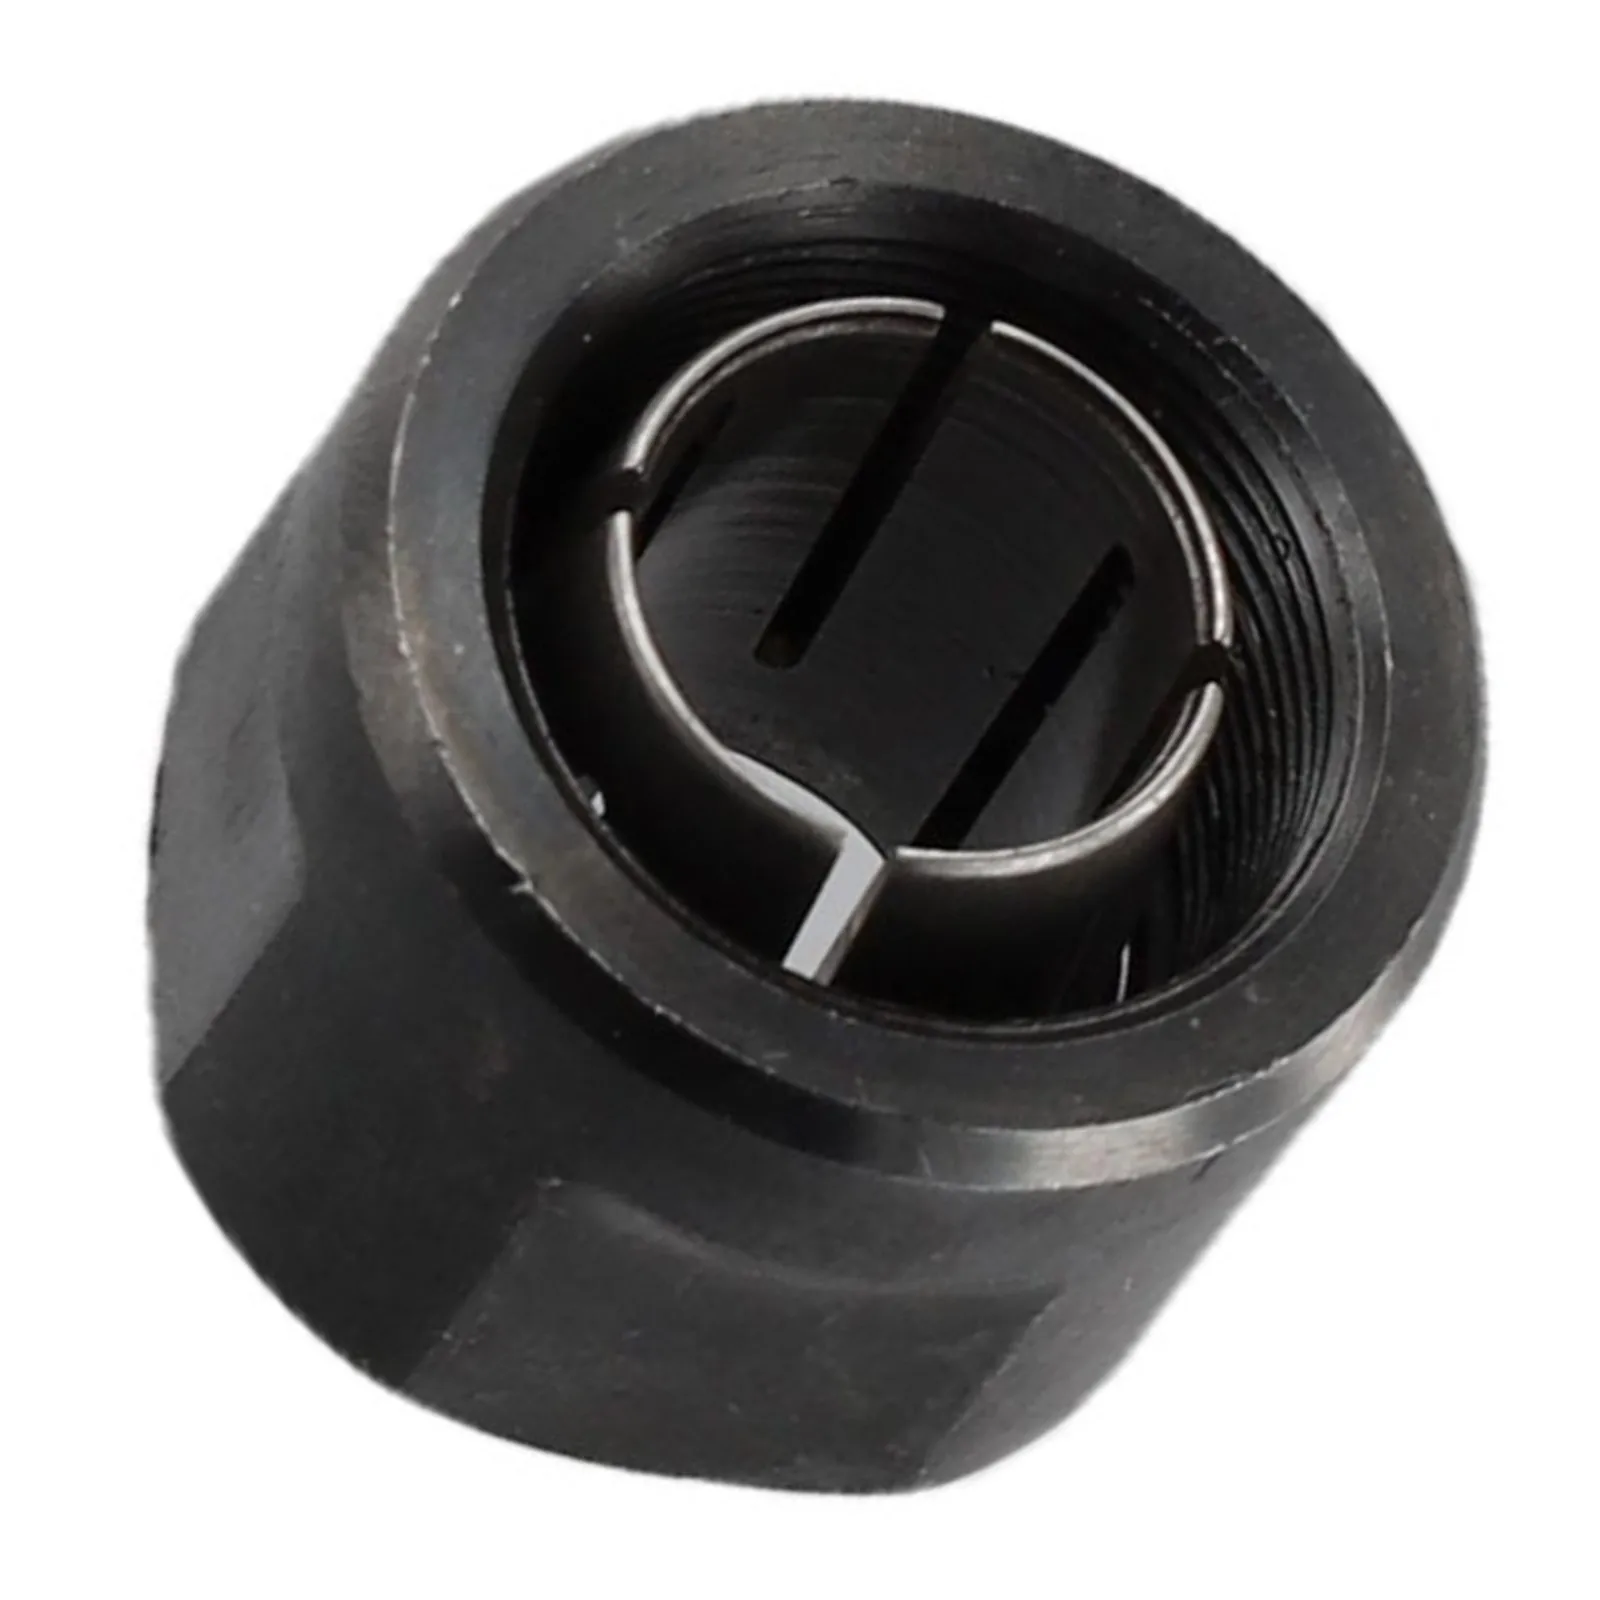 

Durable Collet Nut Plunge Router 1/2 Inch 21*27mm Black Engraving Trimming Machine Female Thread 19.5mm For 3612